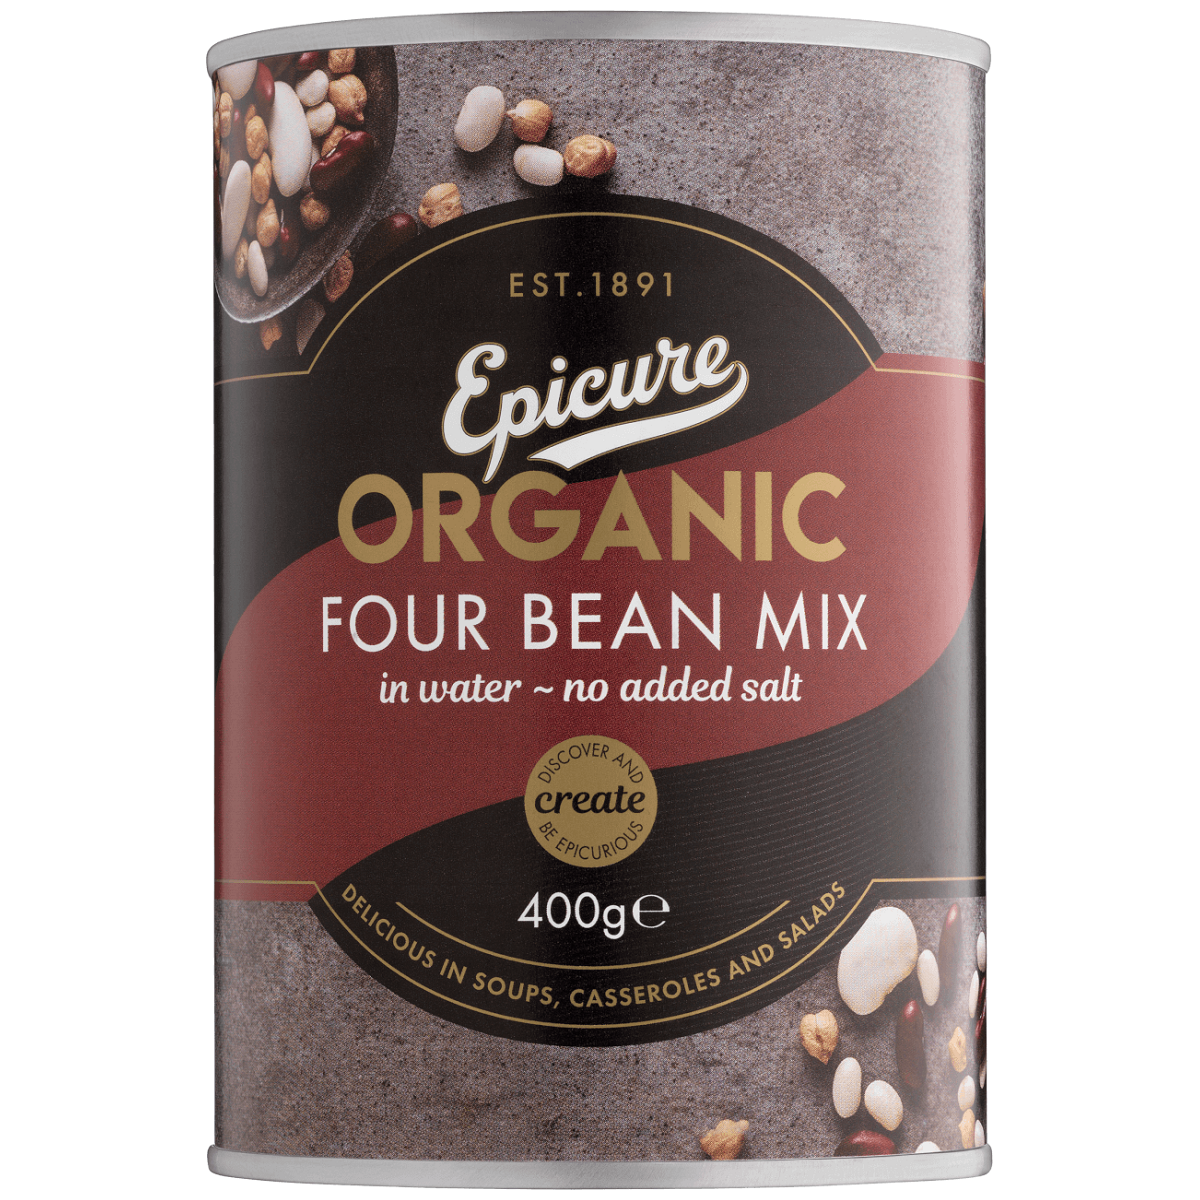 Epicure Organic Four Bean Mix in water no added salt 400g